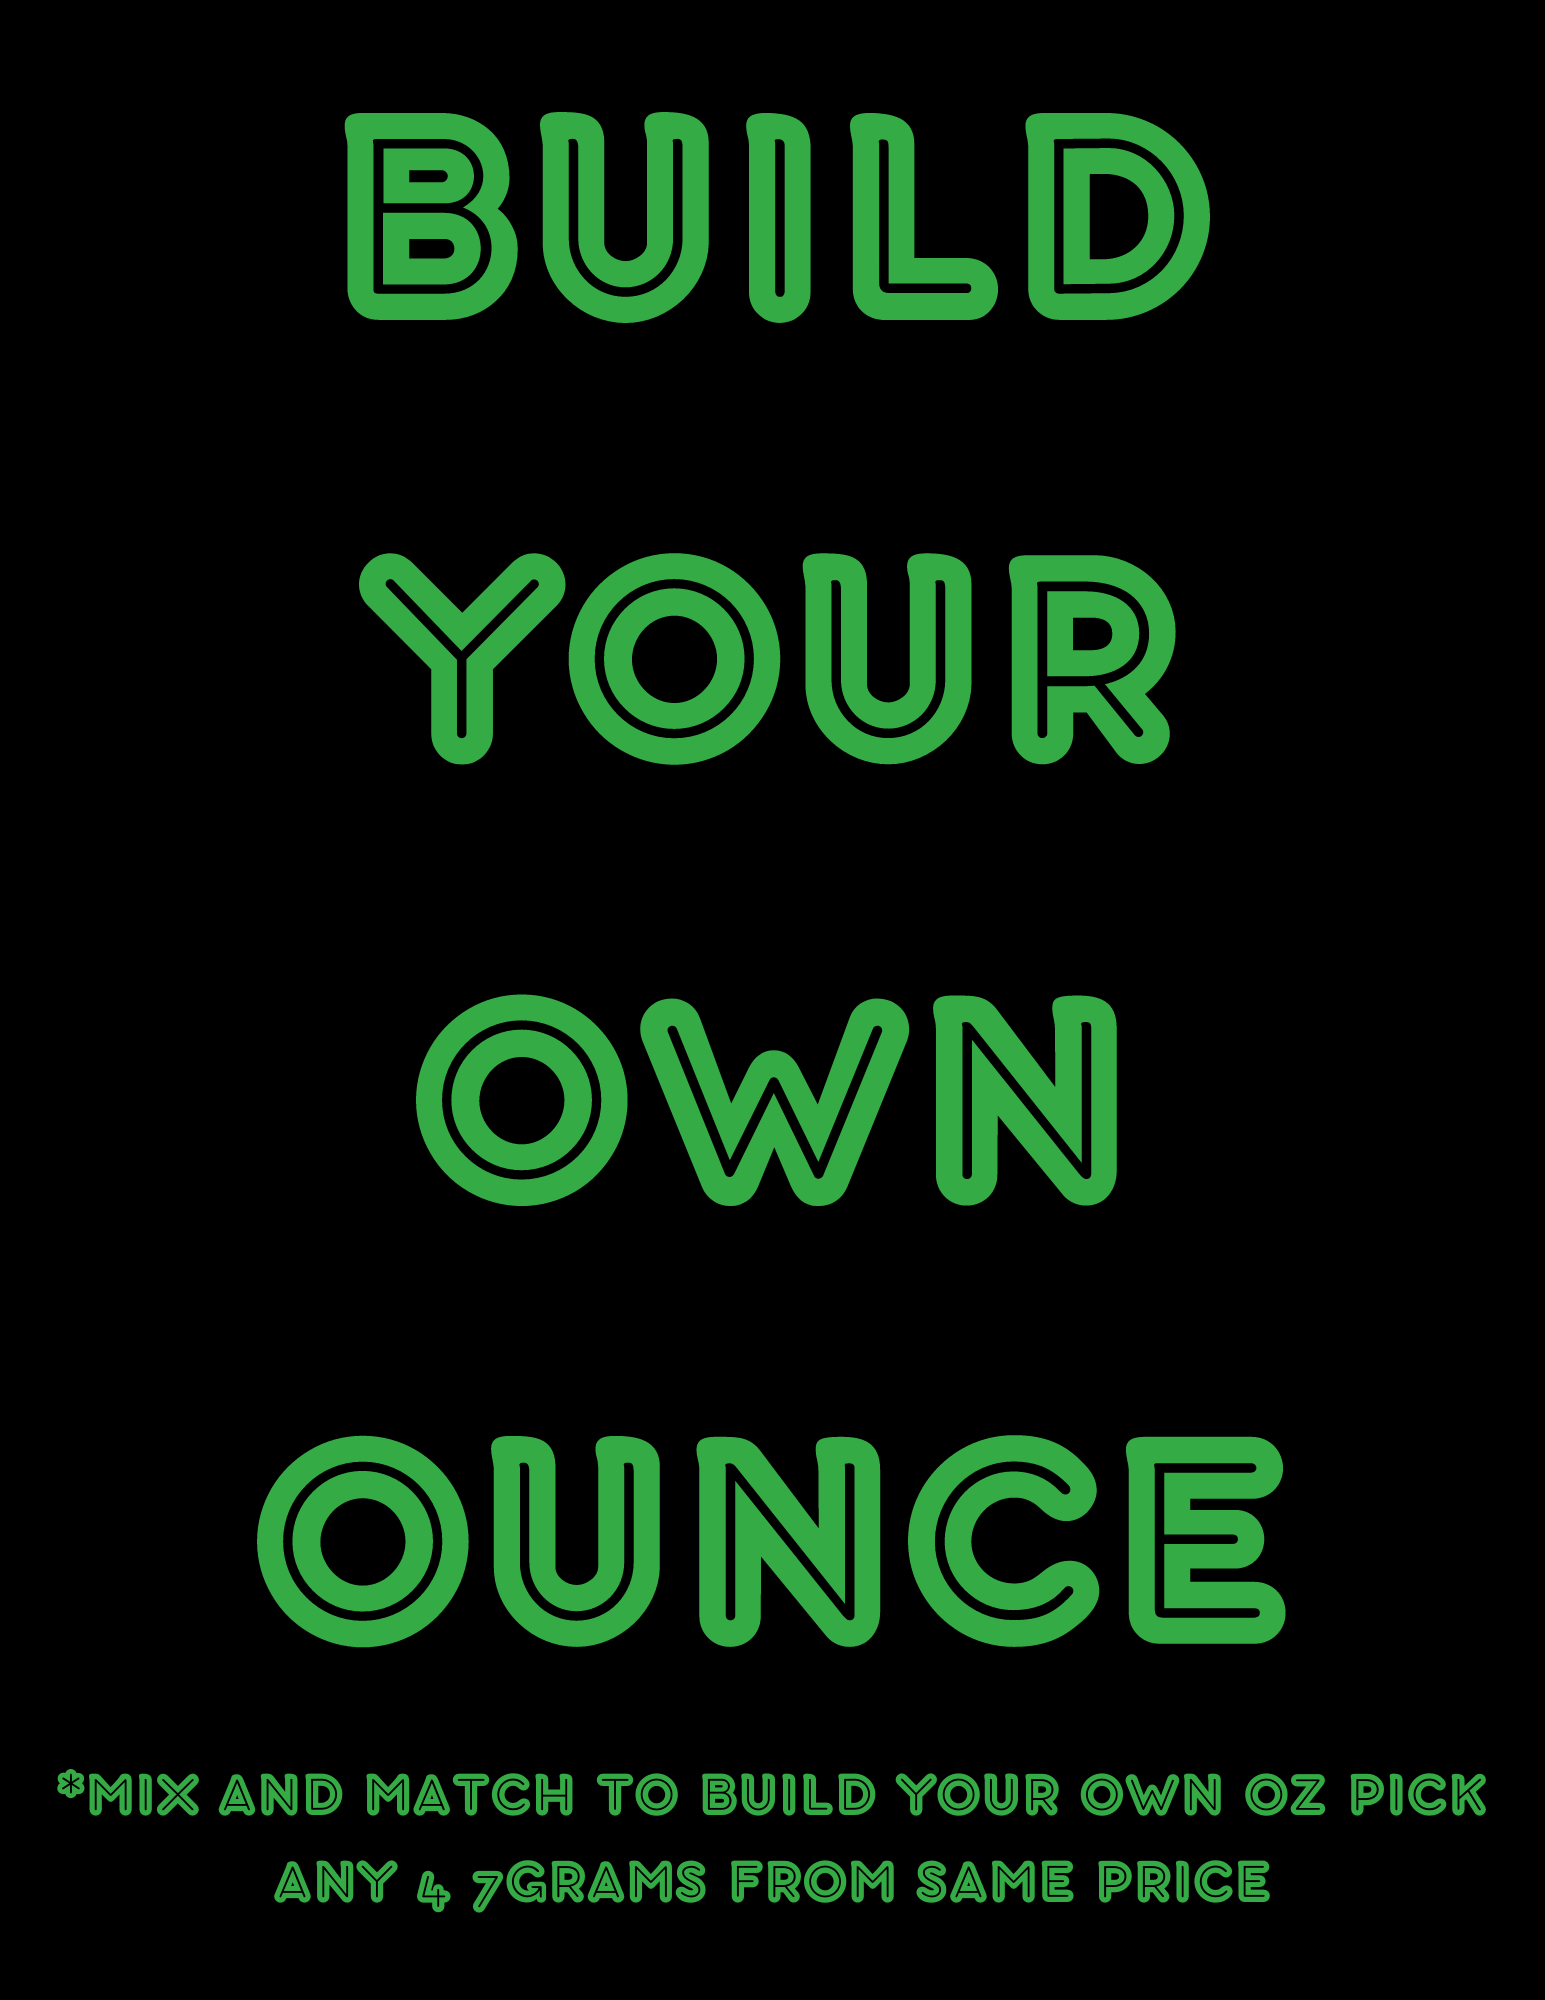 BUILD YOUR OWN OUNCE